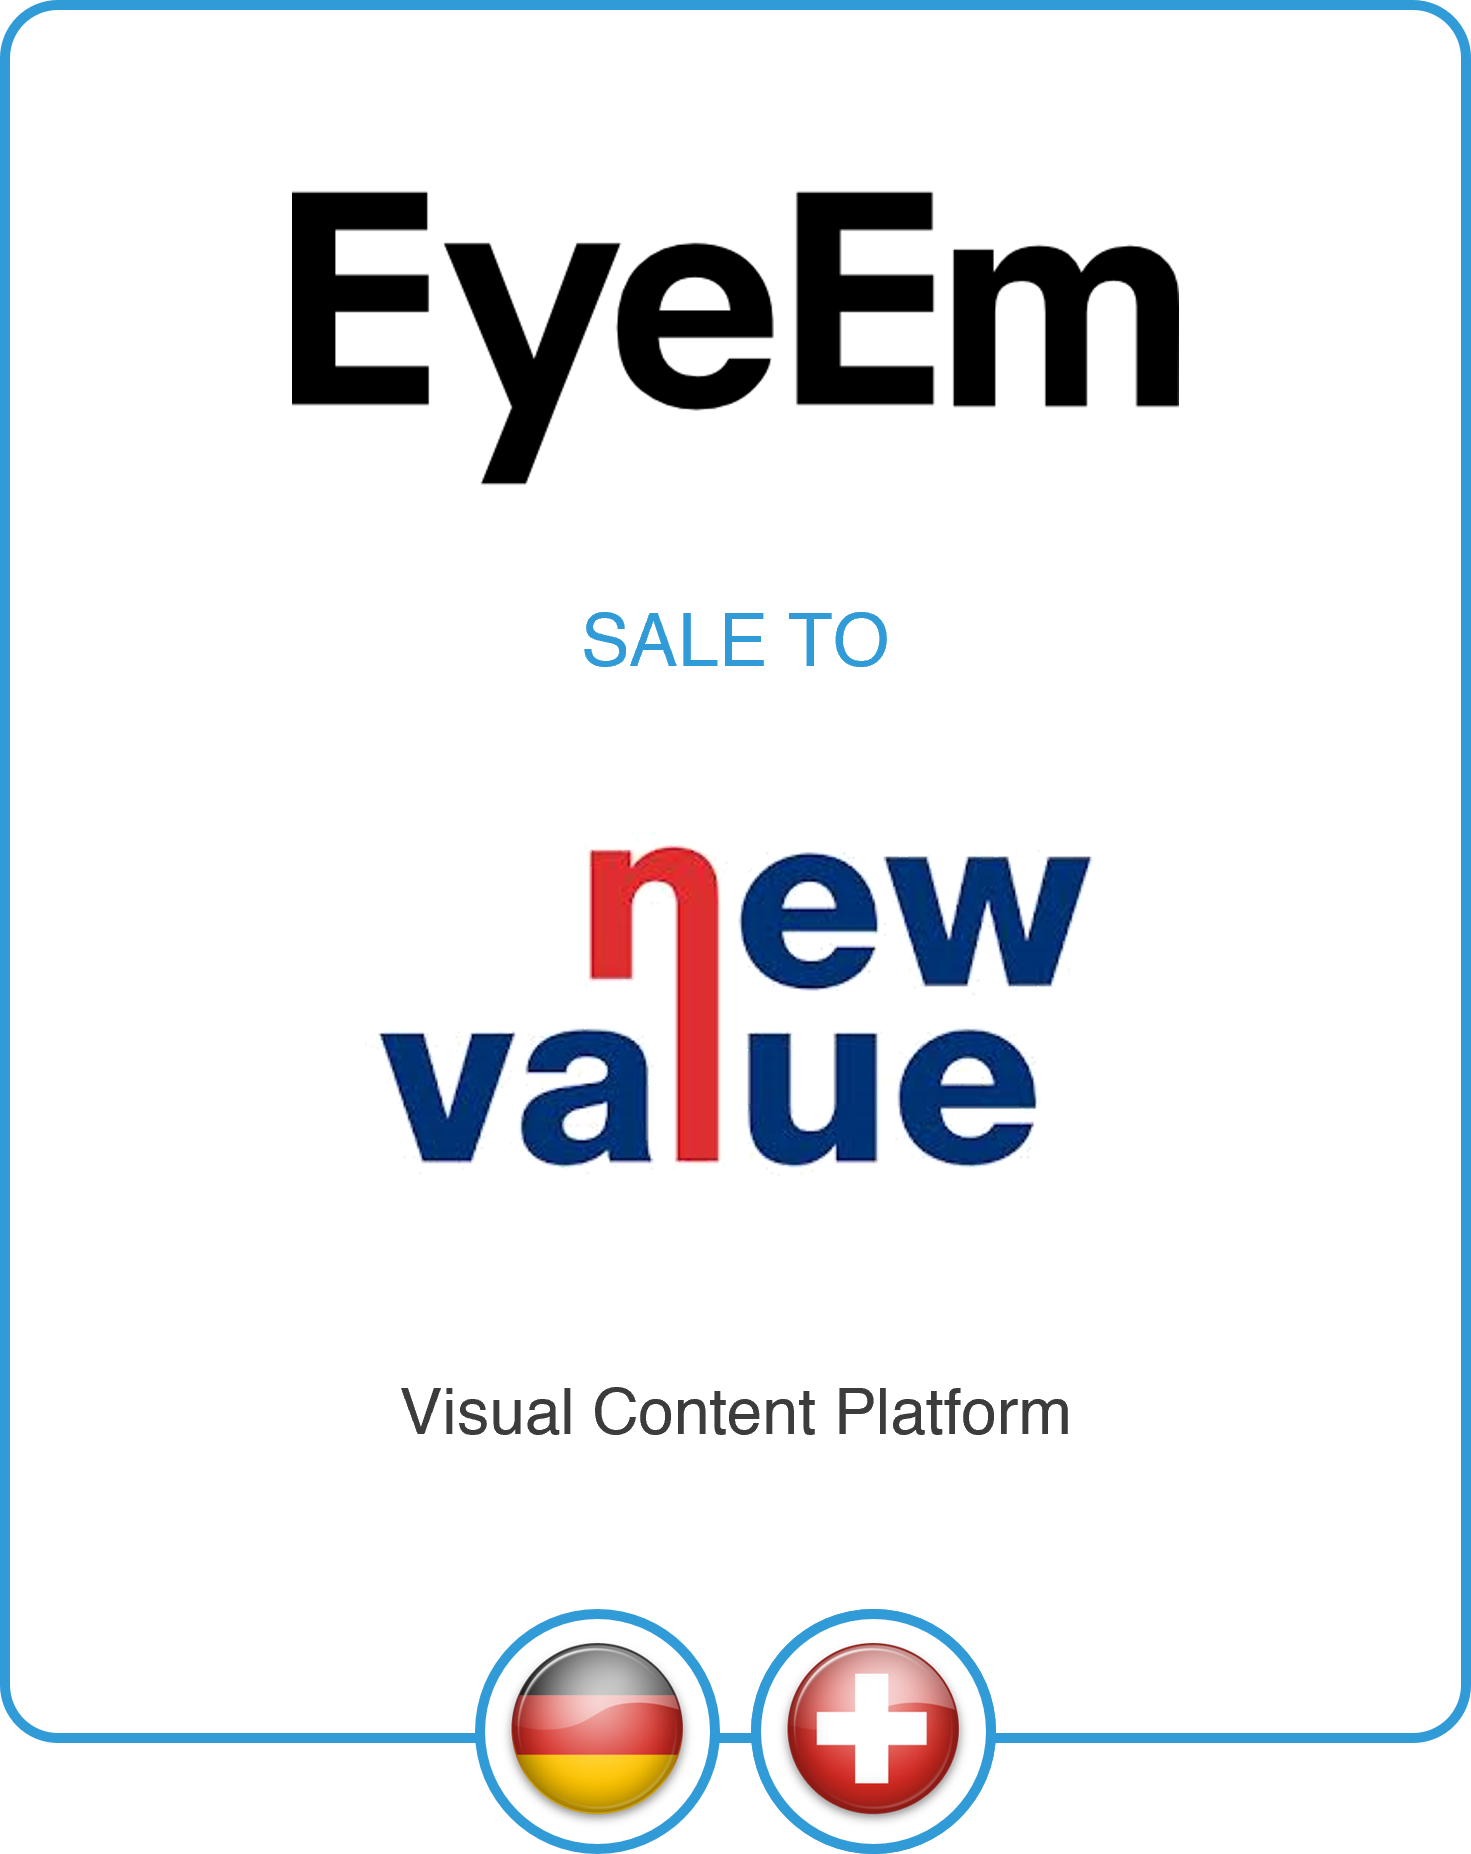 Drake Star Partners Exclusively Advises Eyeem, The Global Marketplace For Premium Stock Photography And Professional Photo & Video Productions, On Its Sale To New Value Ag